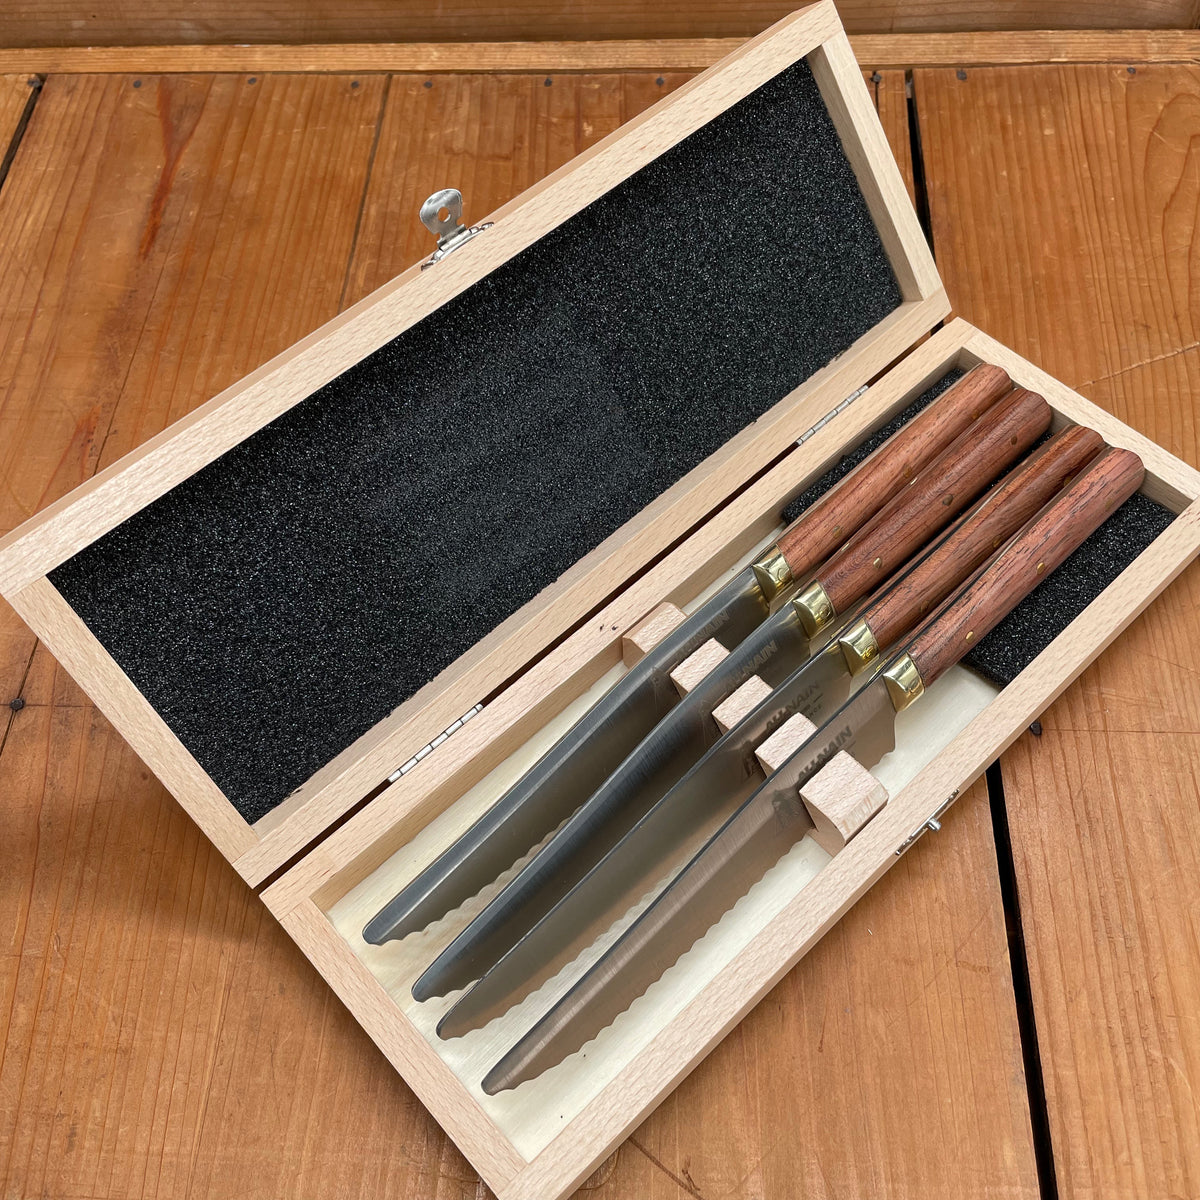 Au Nain Table Knife Set Serrated Stainless Palissander Handles with Box - 4 Pieces